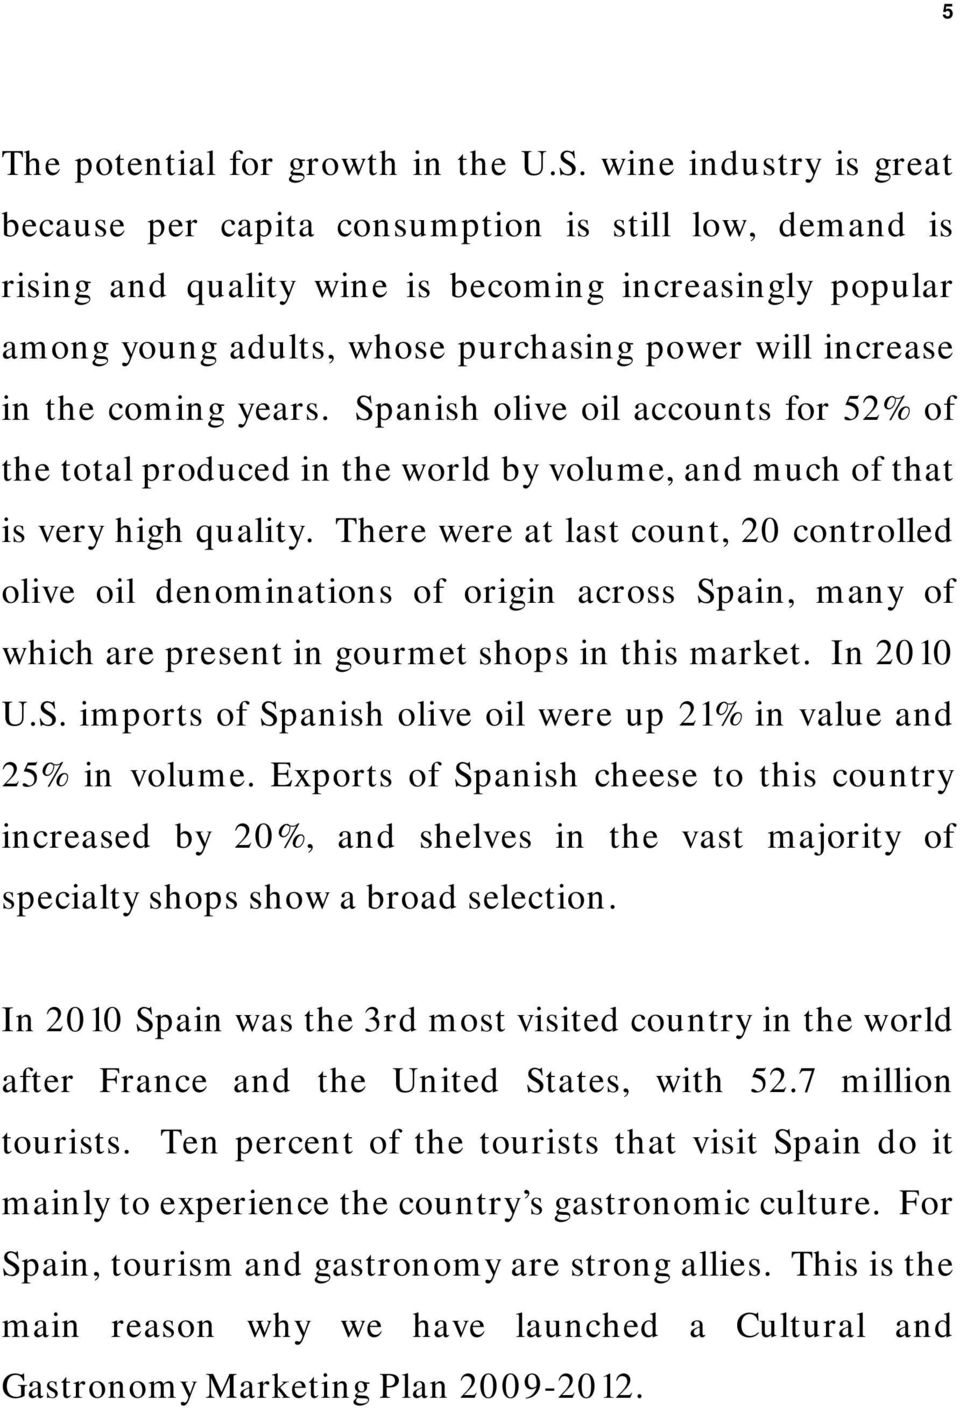 coming years. Spanish olive oil accounts for 52% of the total produced in the world by volume, and much of that is very high quality.